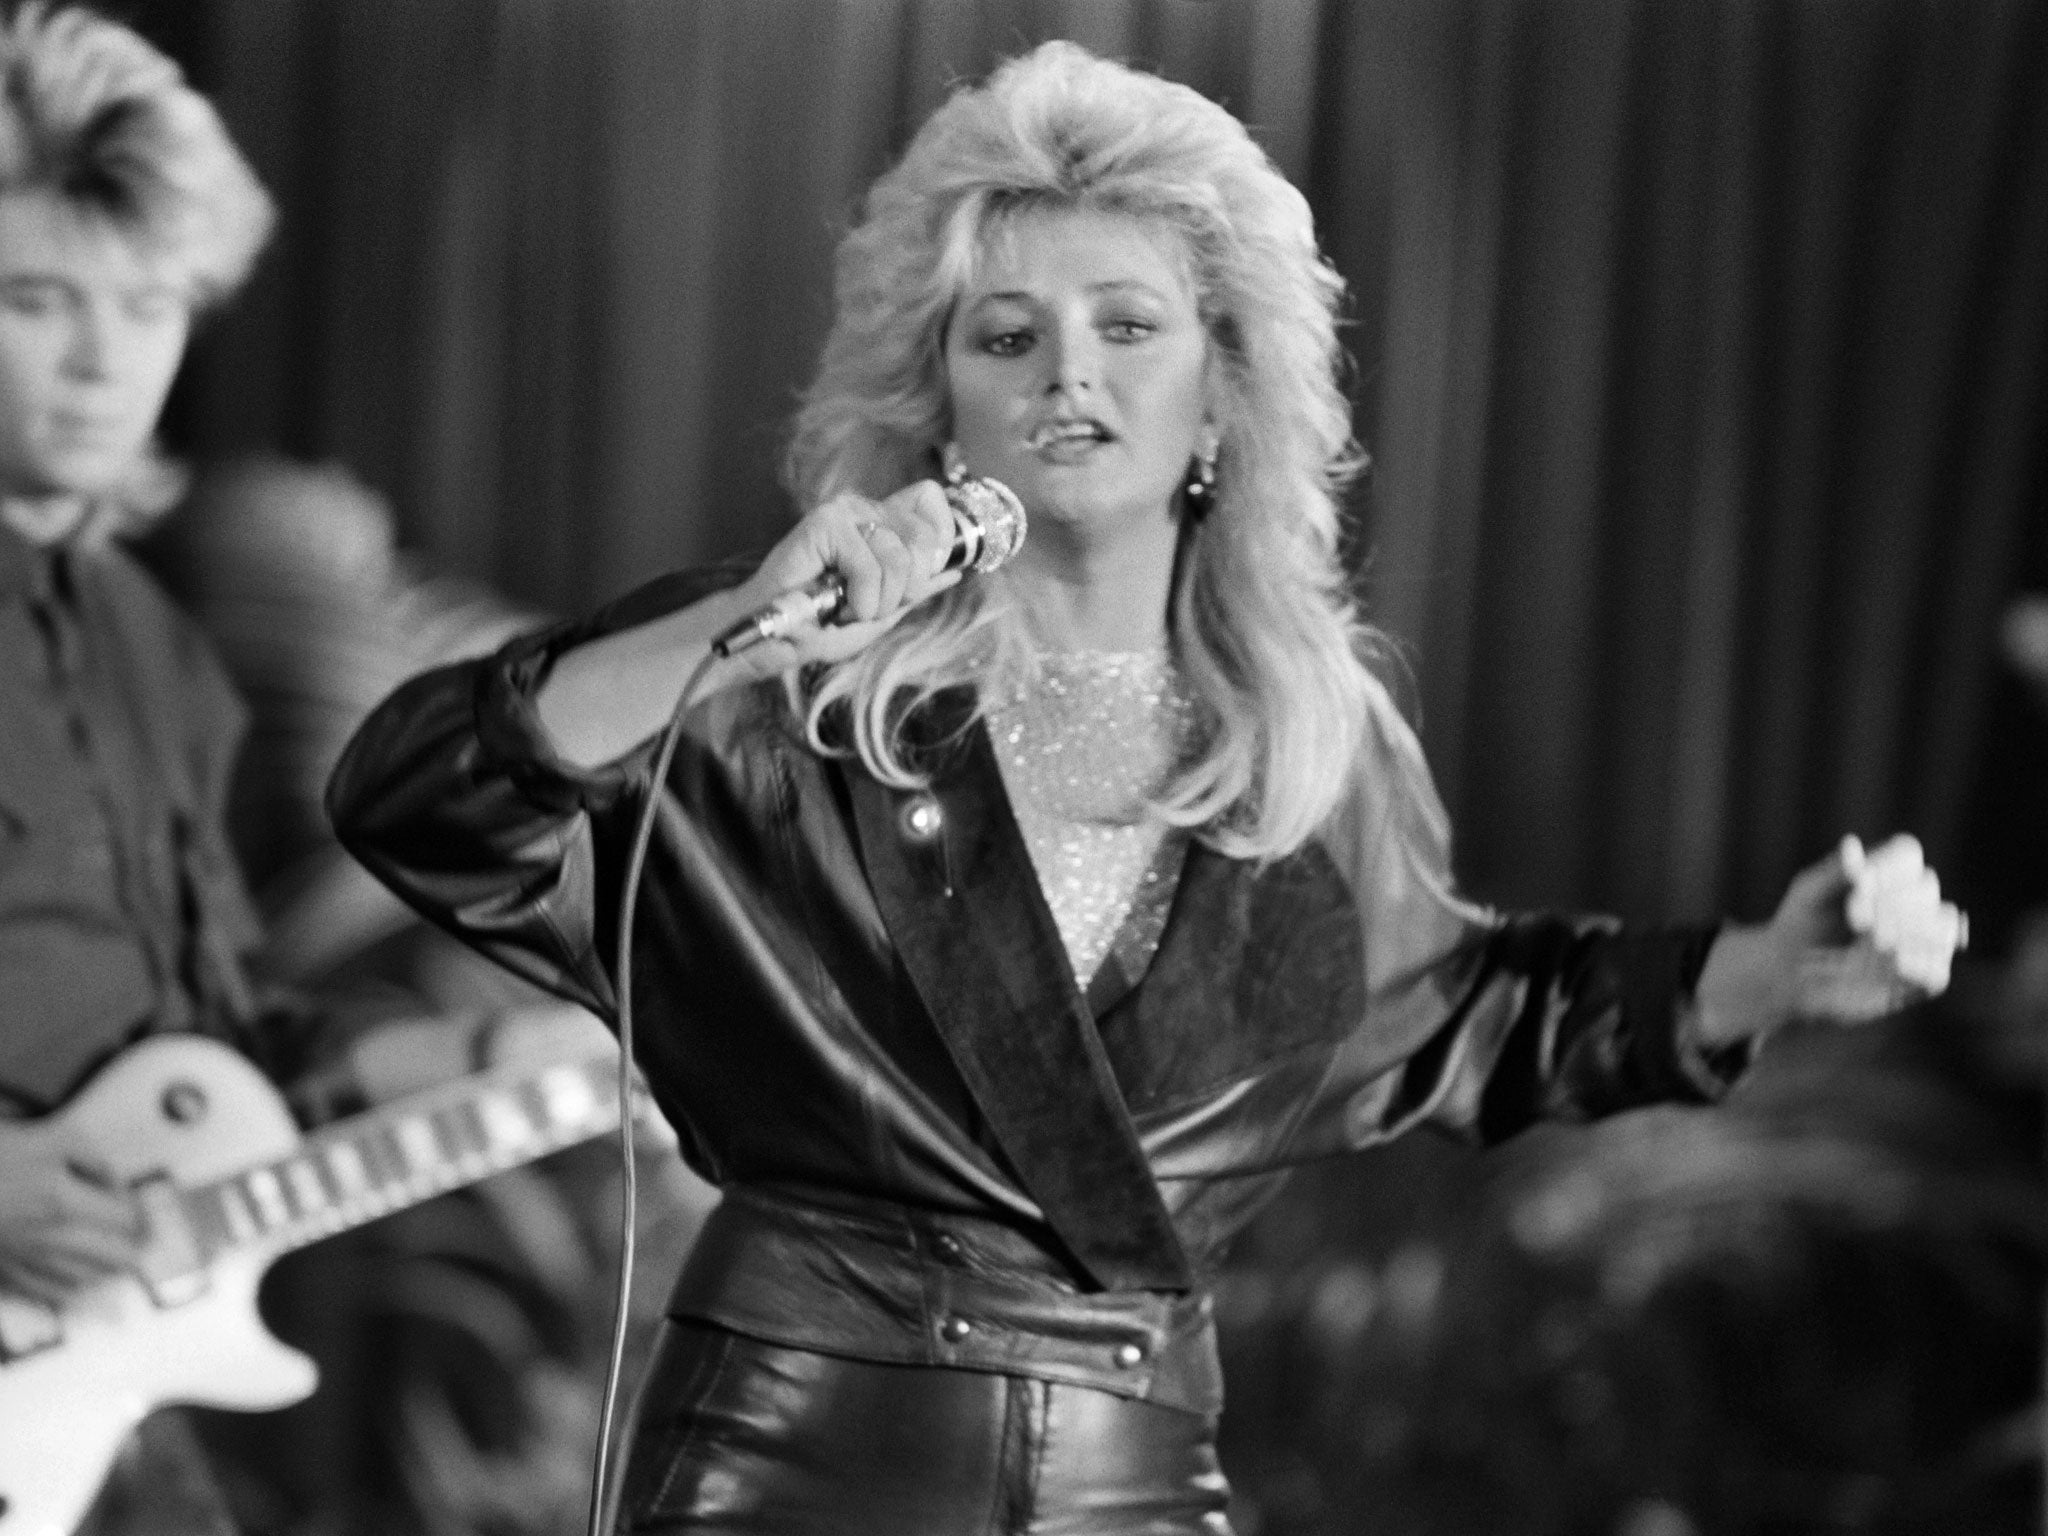 British musician Bonnie Tyler sings at the Maison de la Chimie in Paris on December 17, 1984. Veteran gravelly-voiced singer Bonnie Tyler is to represent Britain at the Eurovision Song Contest, the BBC announced on March 7, 2013.